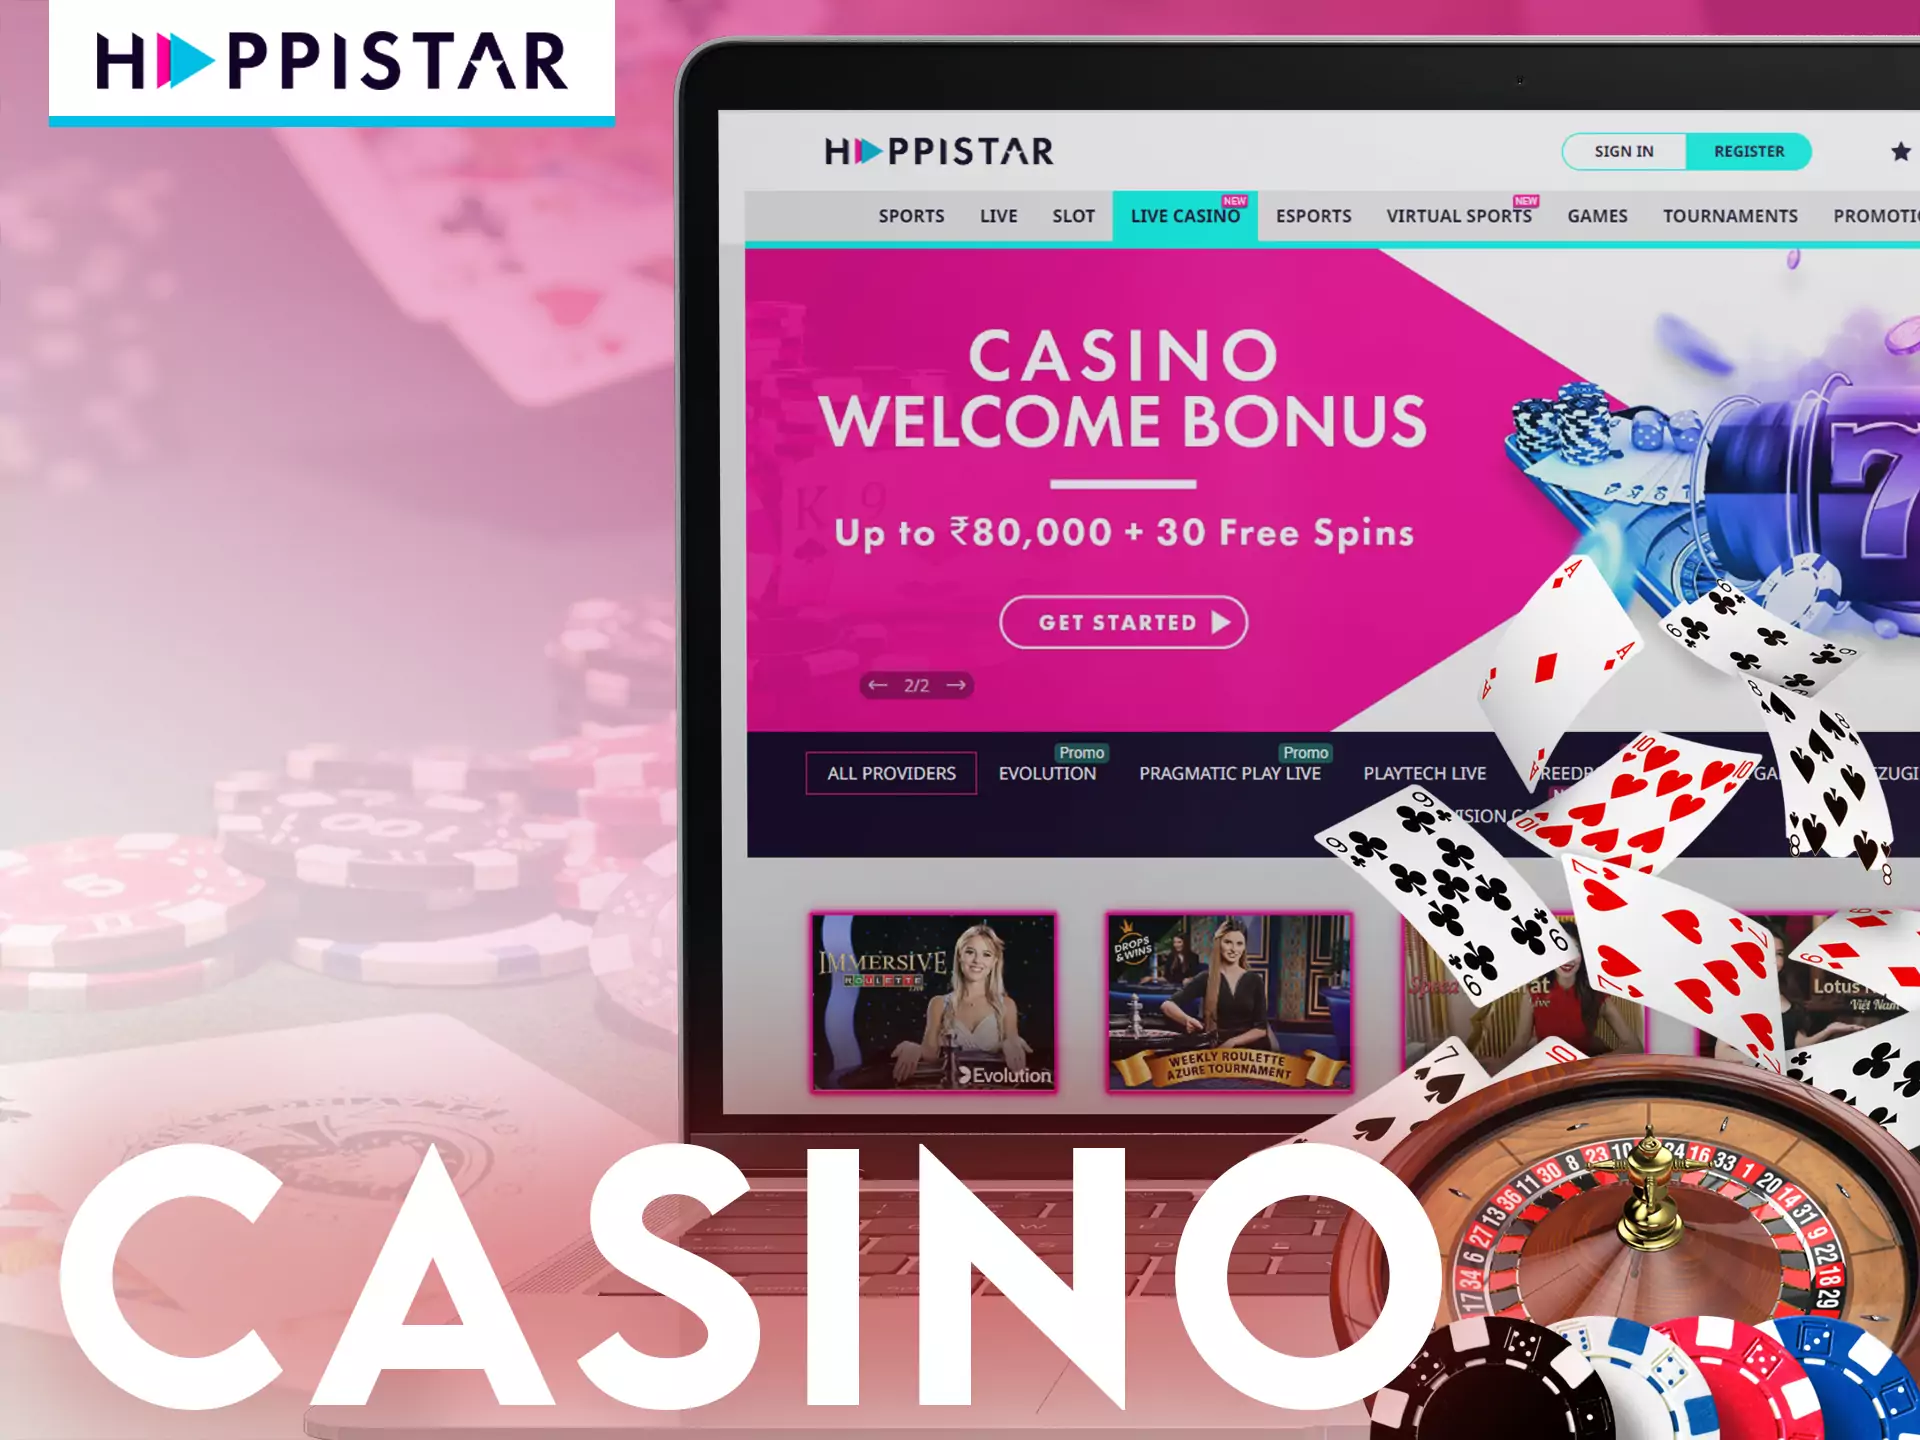 On Happistar, you can play many casino games.